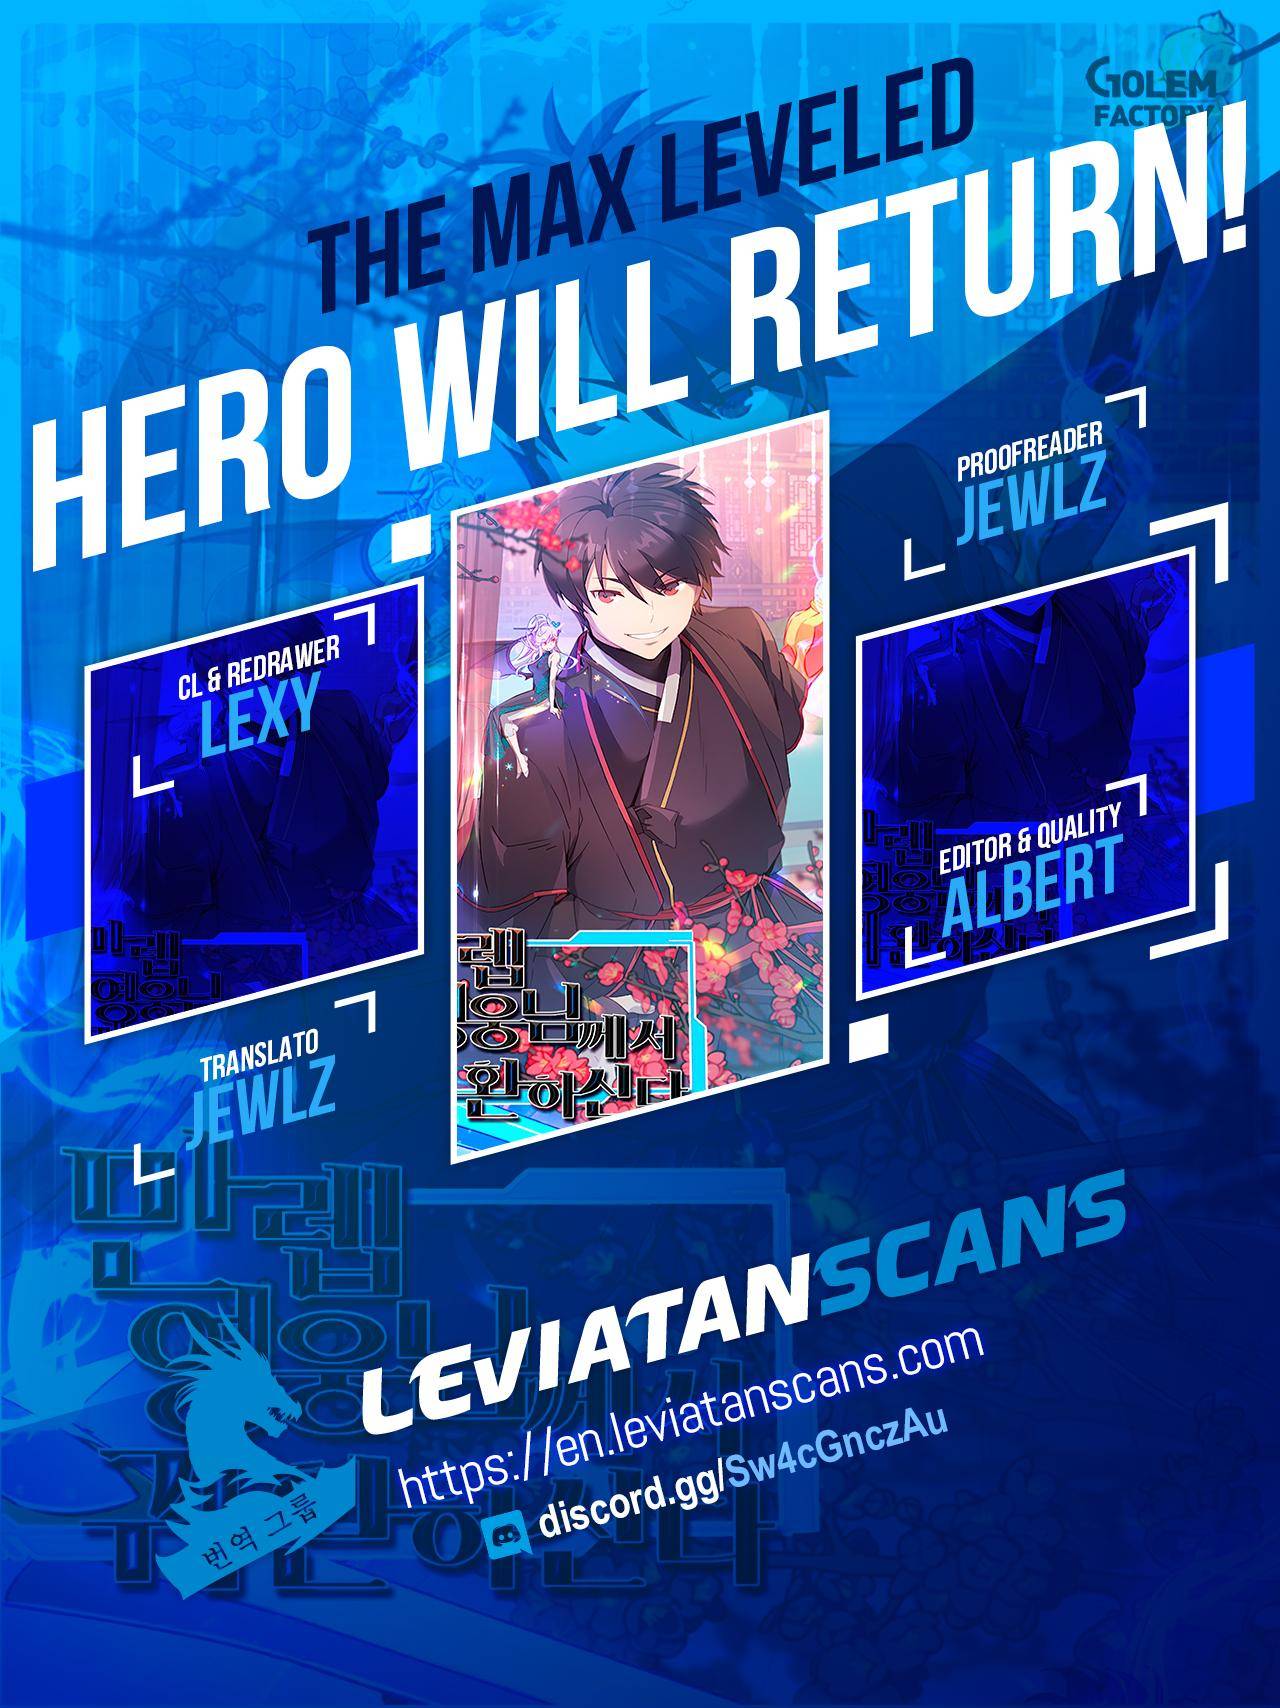 The MAX leveled hero will return! Chapter 124